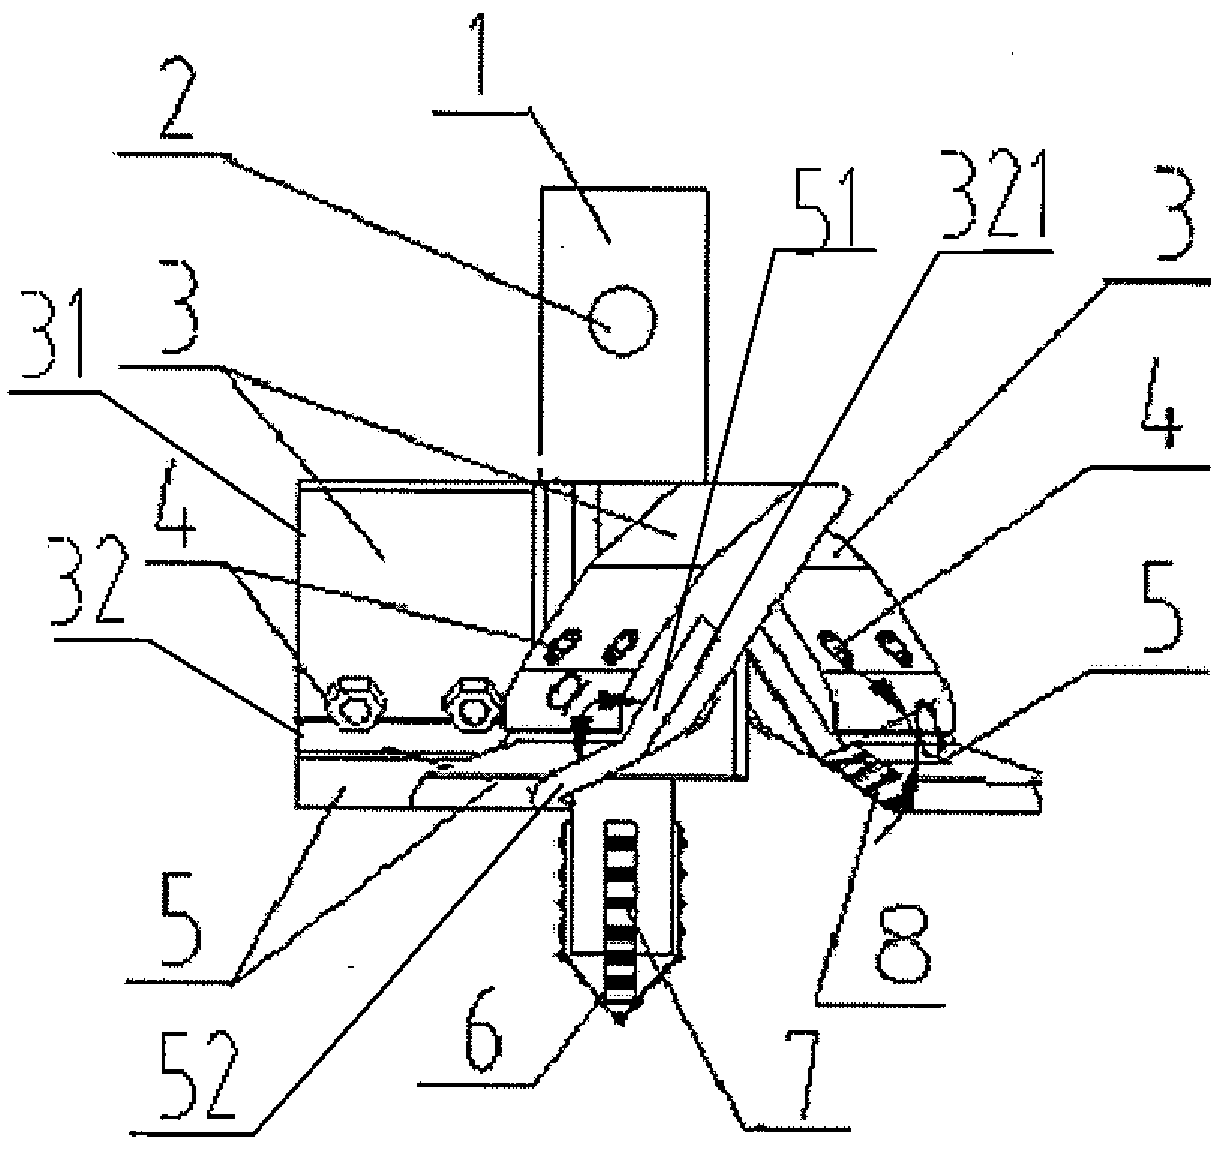 Drill bit and sampling device